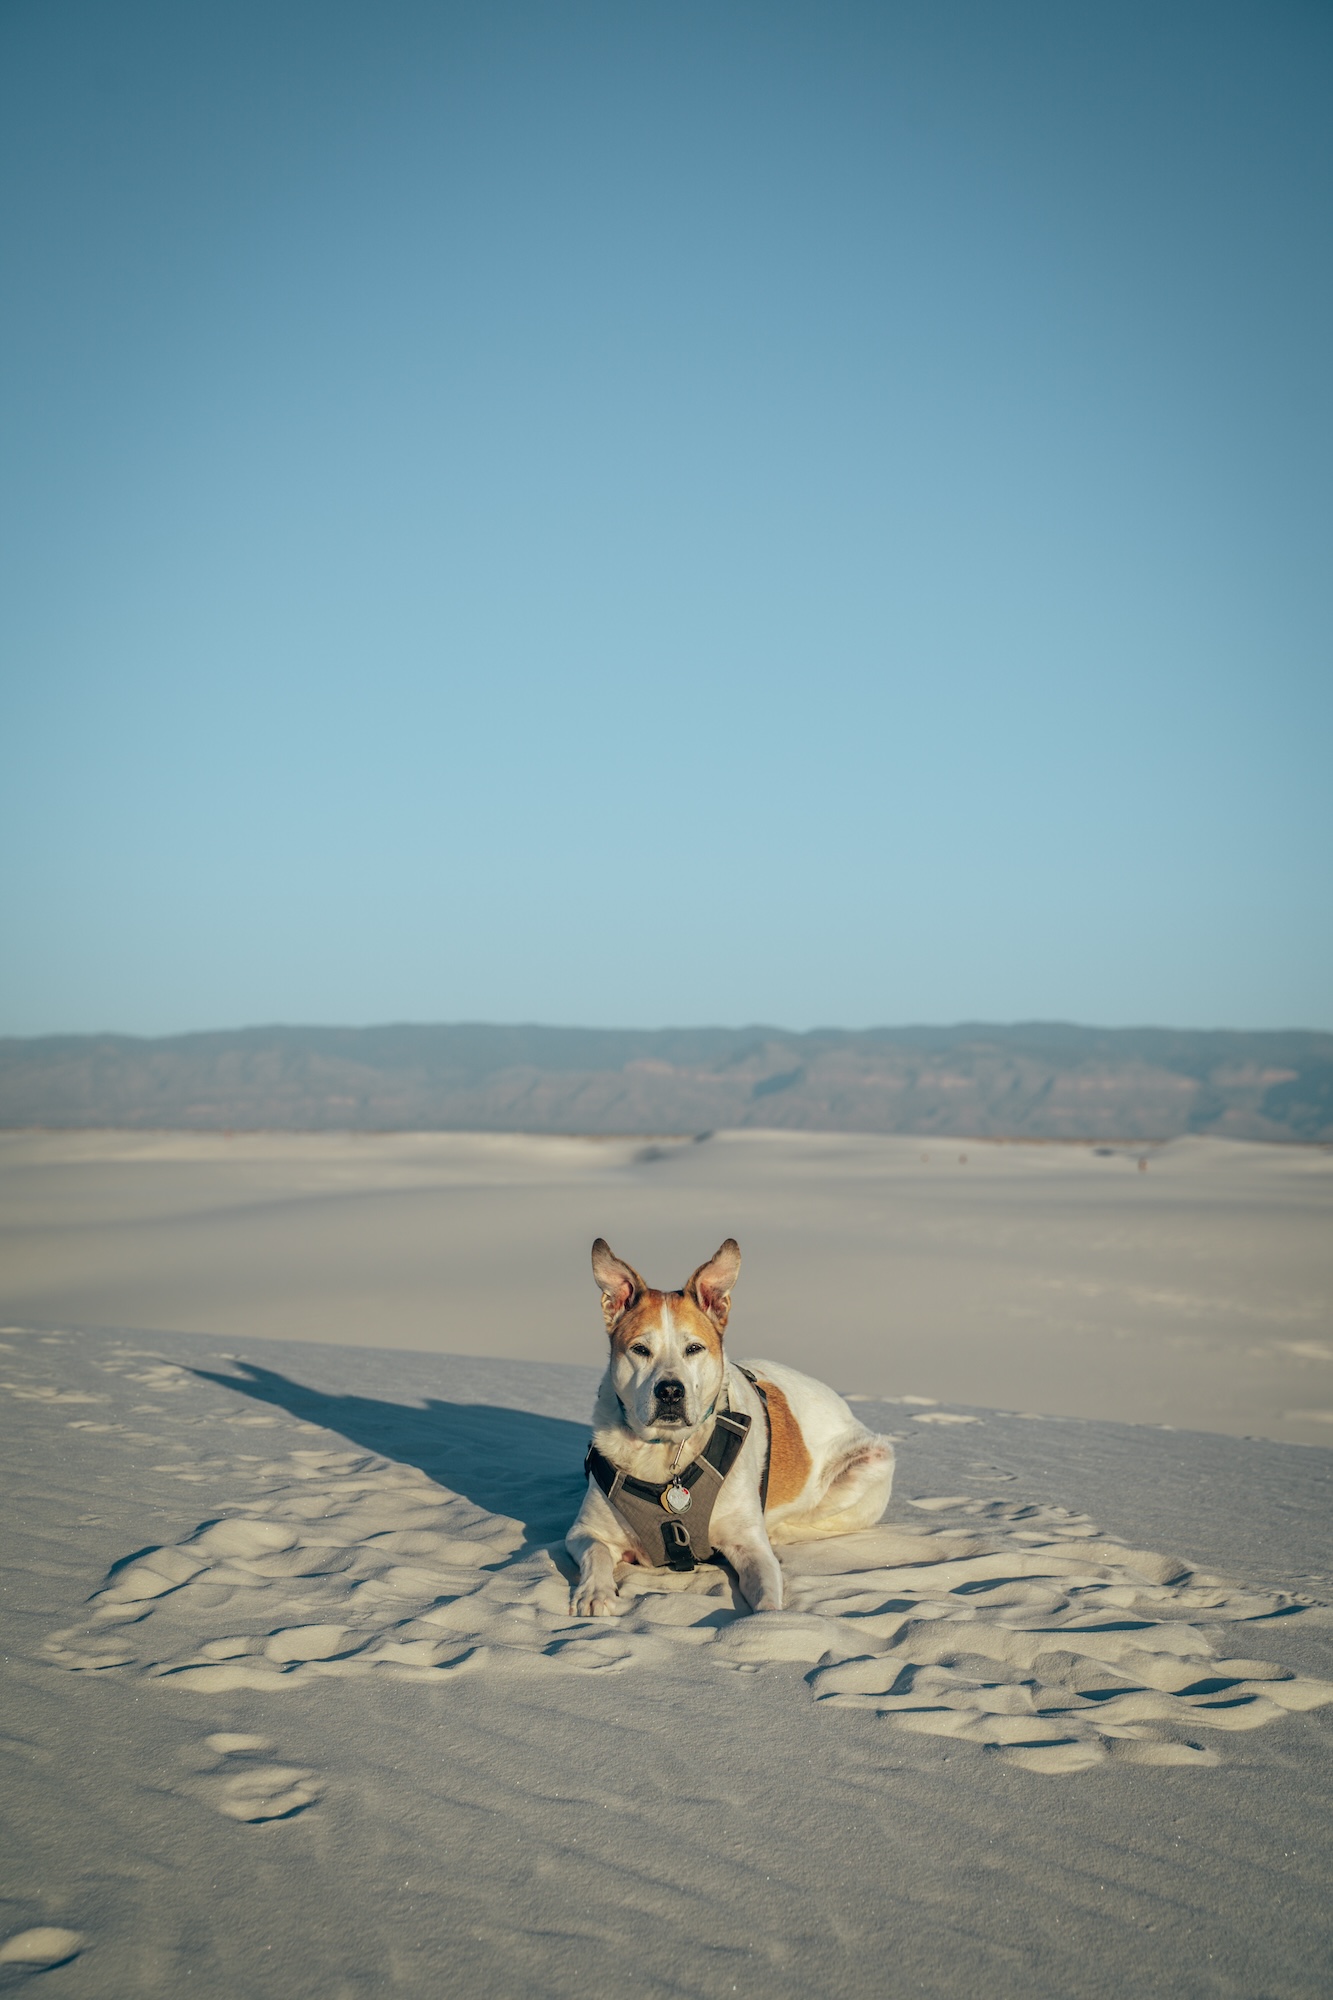 Dogs at White Sands National Park - New Mexico